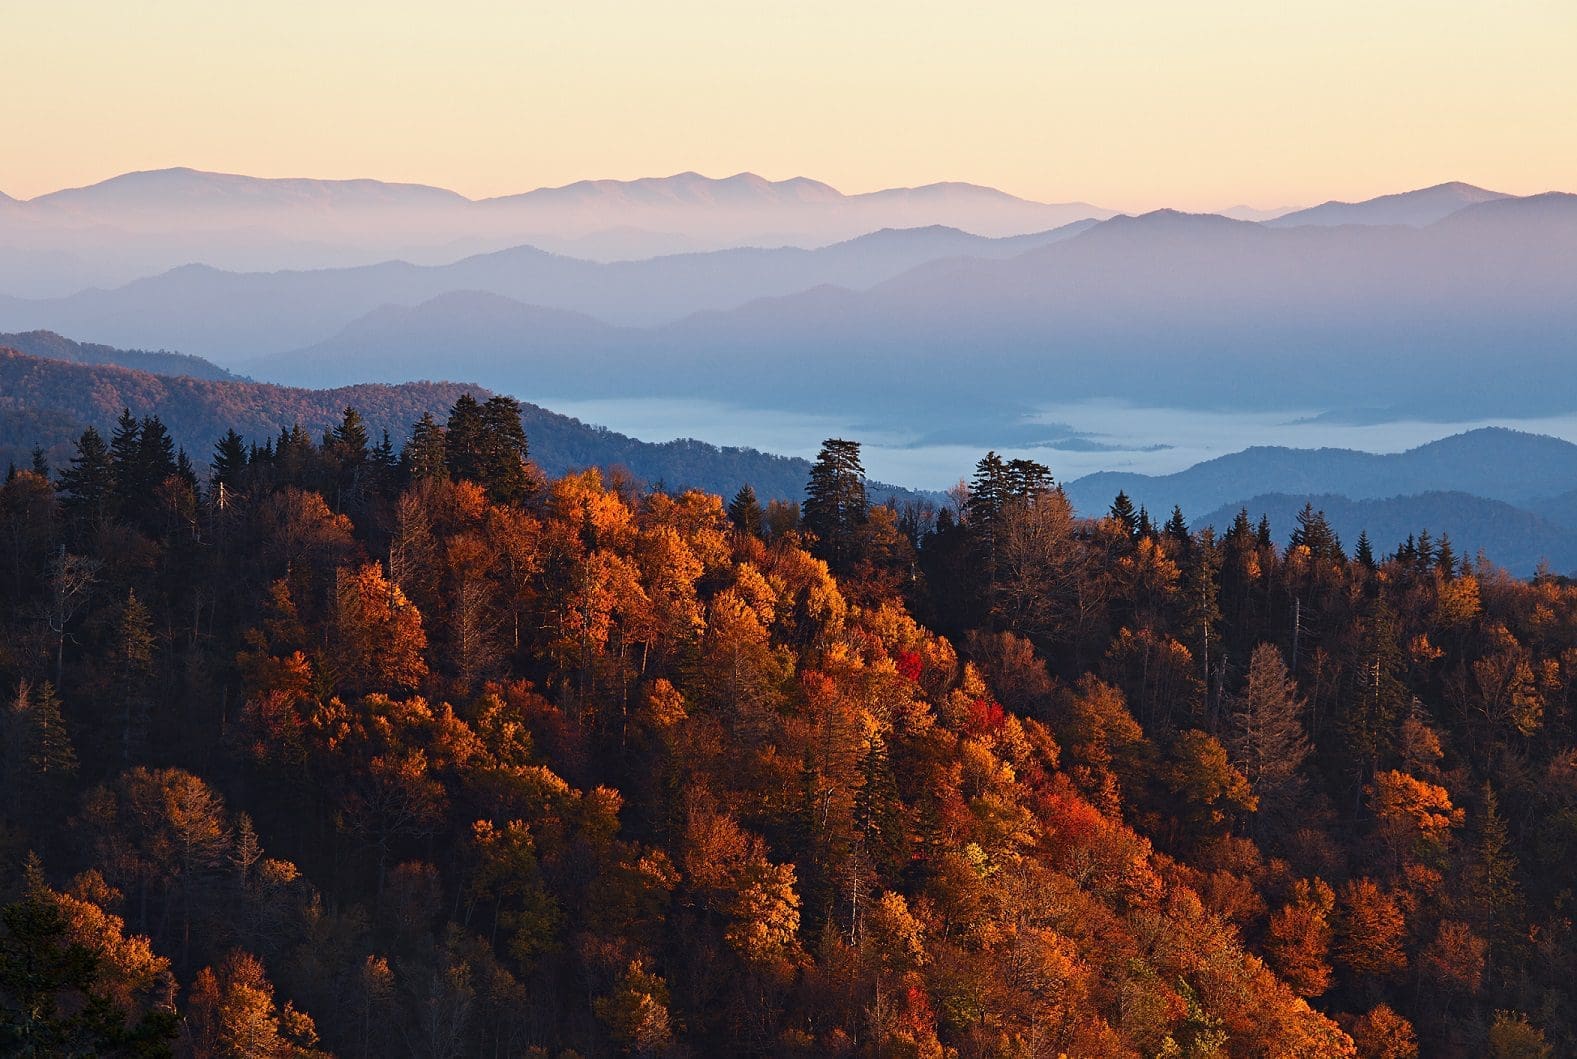 What is the most popular destination in the Smoky Mountains National Park?